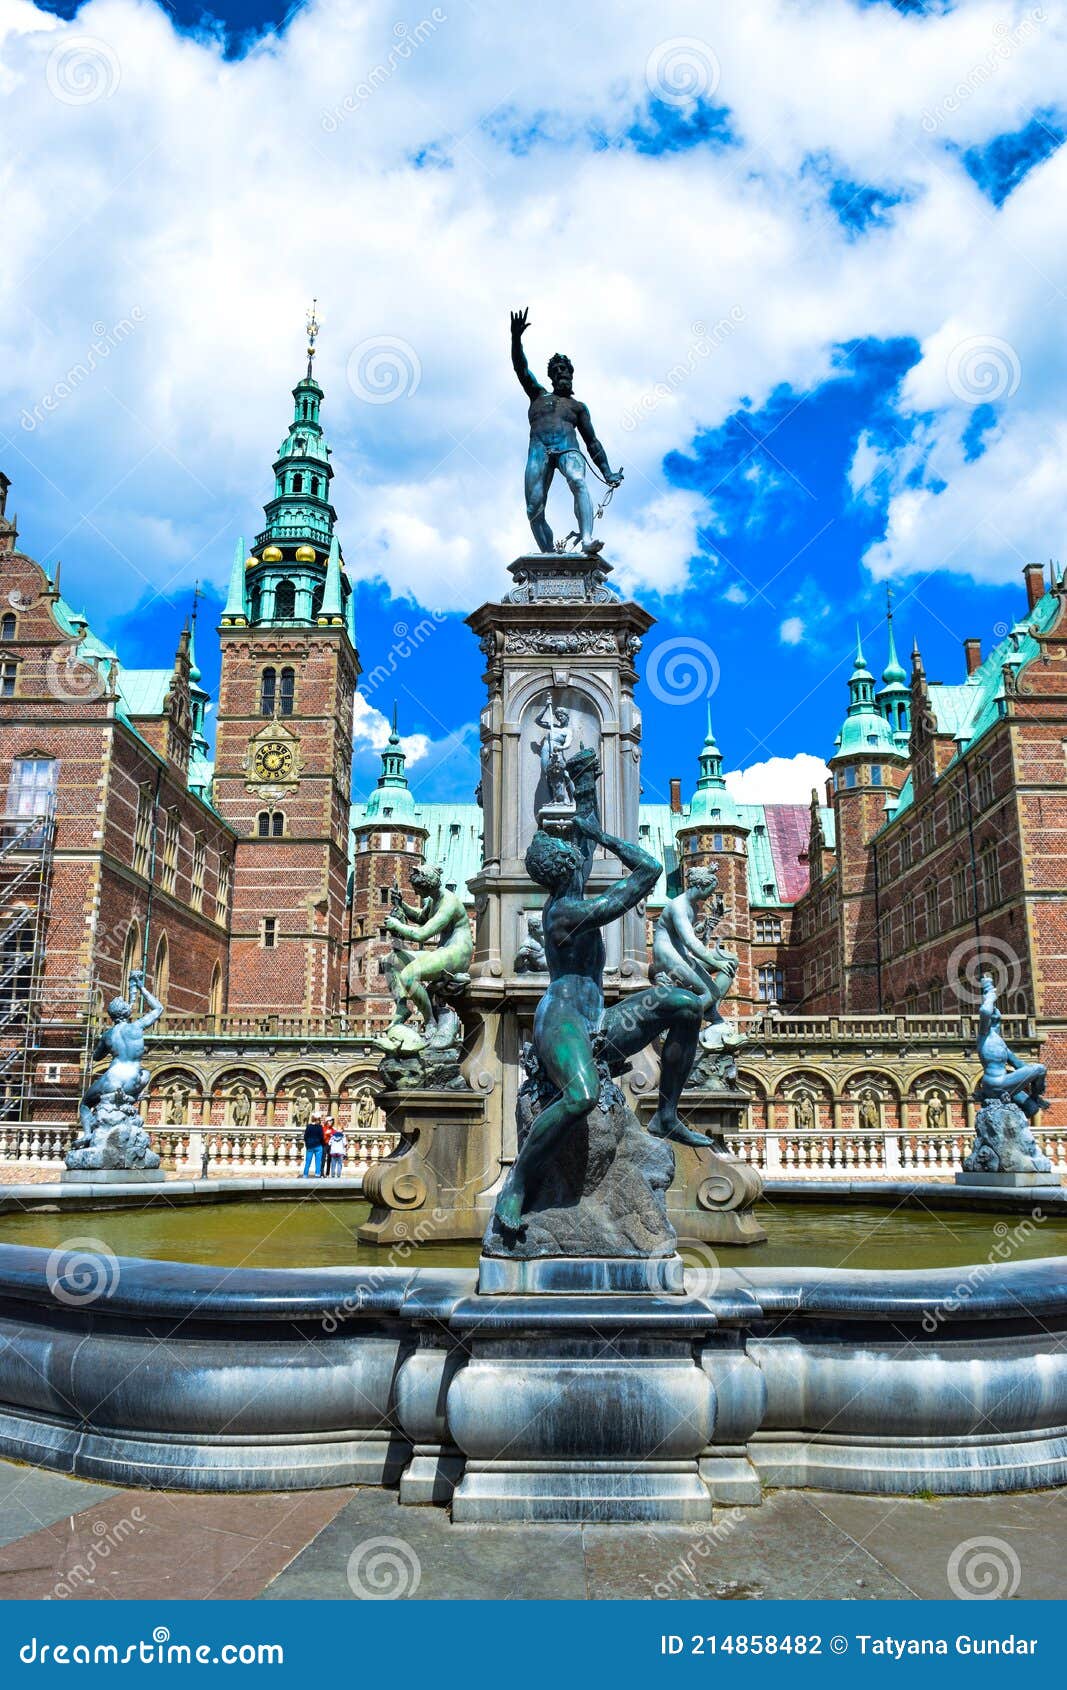 Sea God Neptune Fountain in Hillerod, Denmark Editorial Photography - Image ancient, blue: 214858482